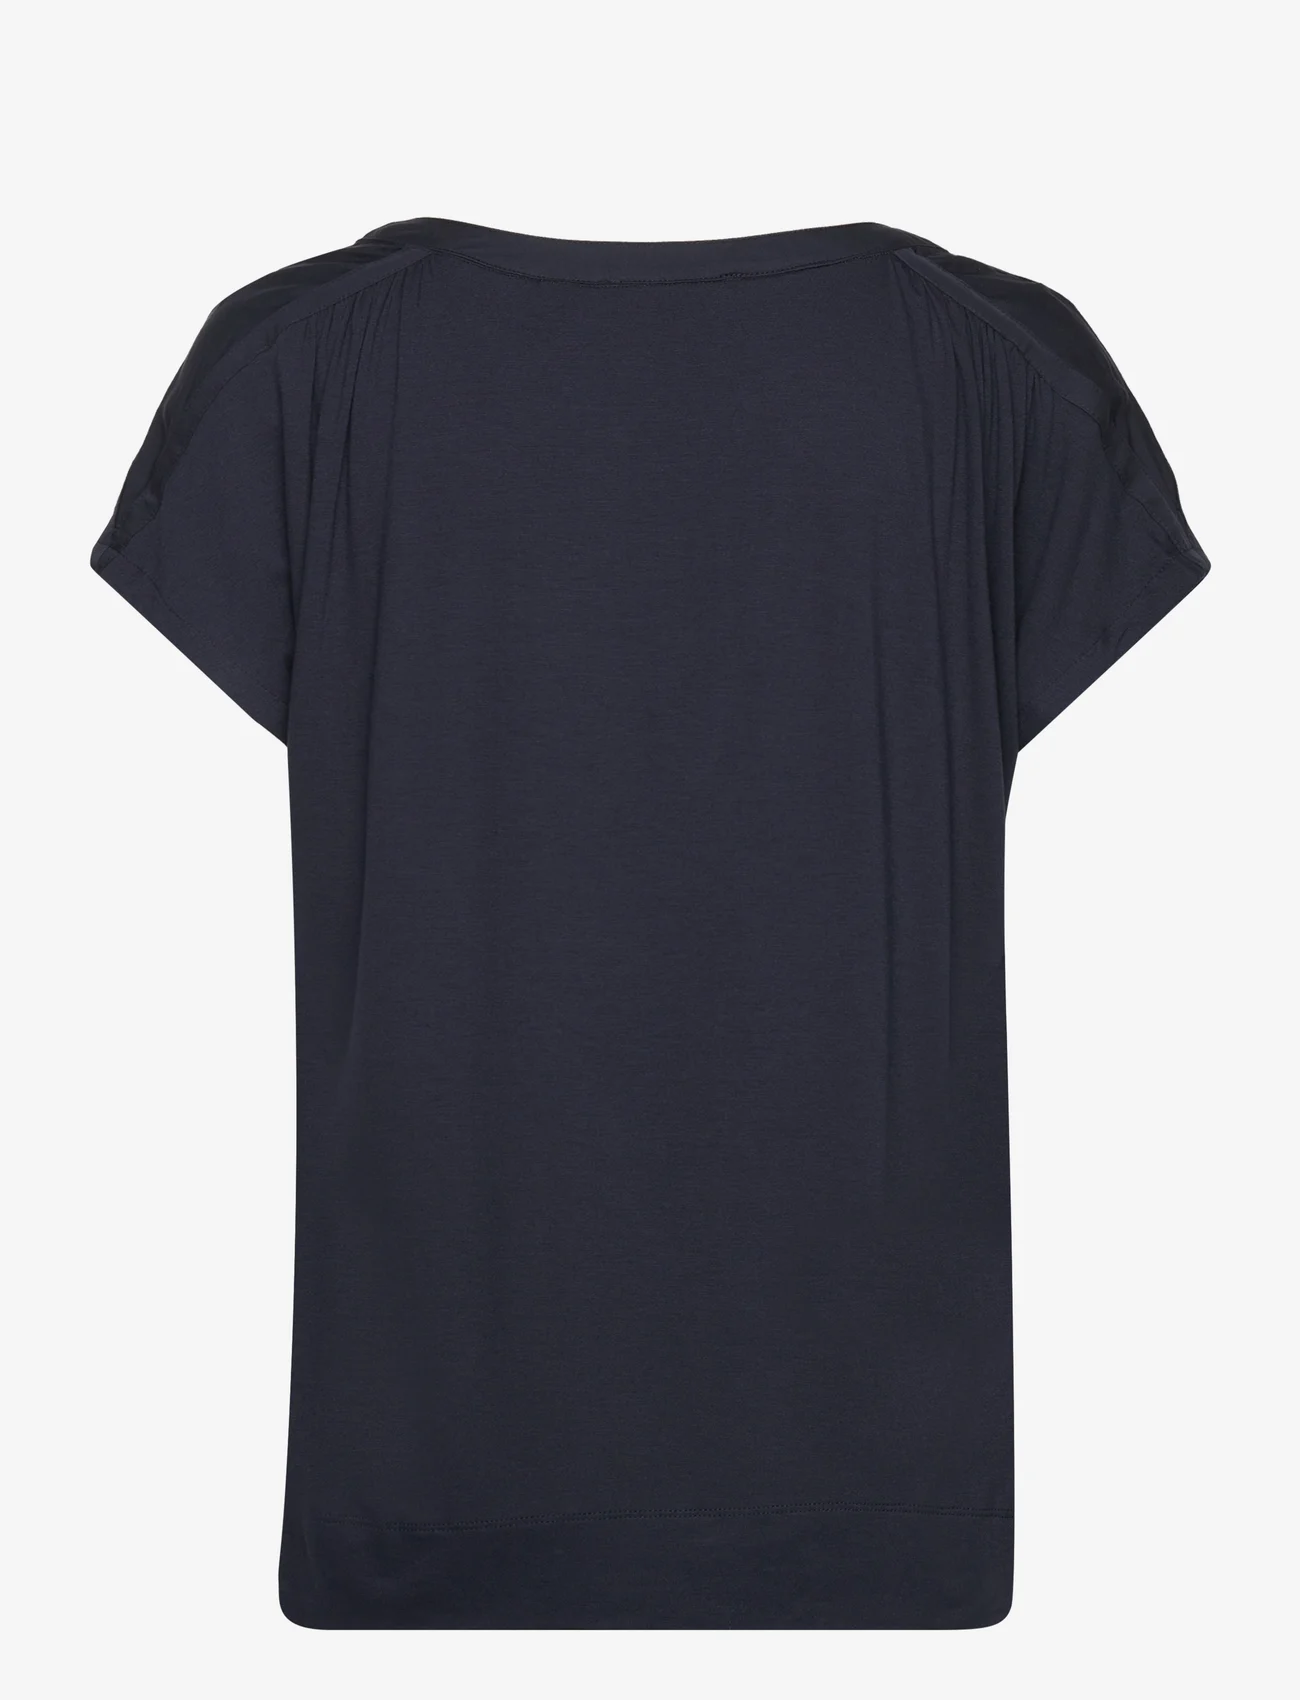 Esprit Collection - V-necked viscose blouse - t-shirts - navy - 1